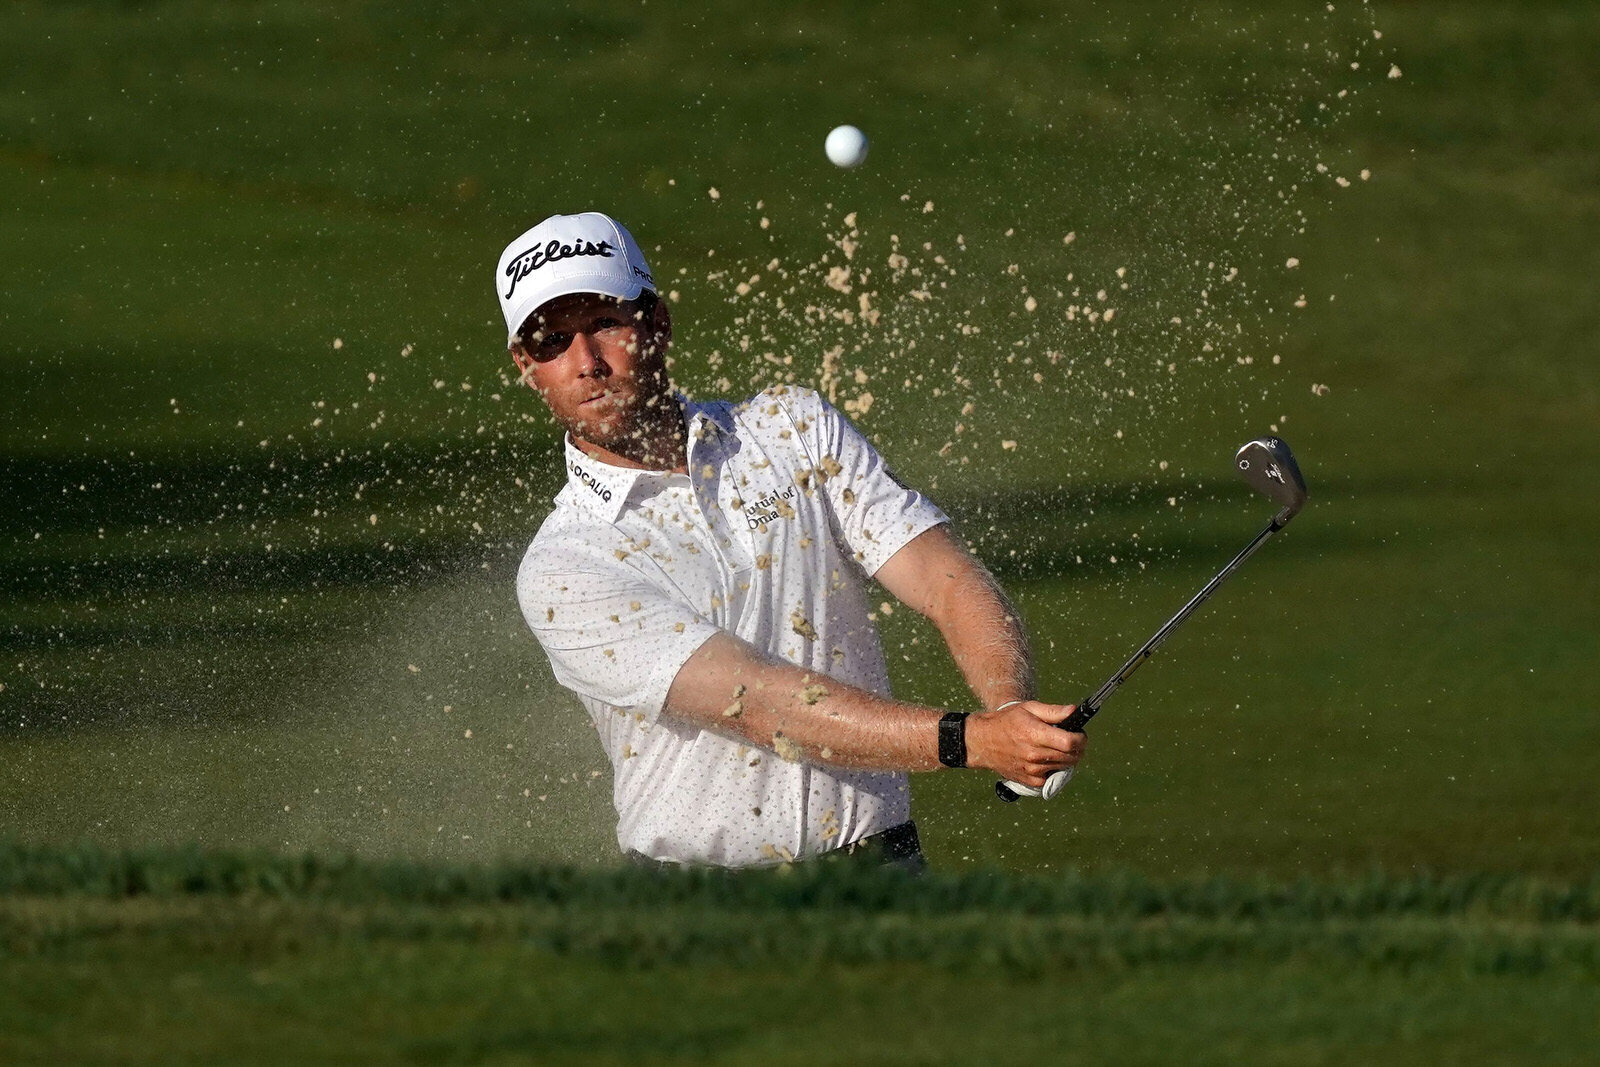  OLYMPIA FIELDS, ILLINOIS - AUGUST 27: Tyler Duncan of the United States plays a shot from a bunker on the 18th hole during the first round of the BMW Championship on the North Course at Olympia Fields Country Club on August 27, 2020 in Olympia Field